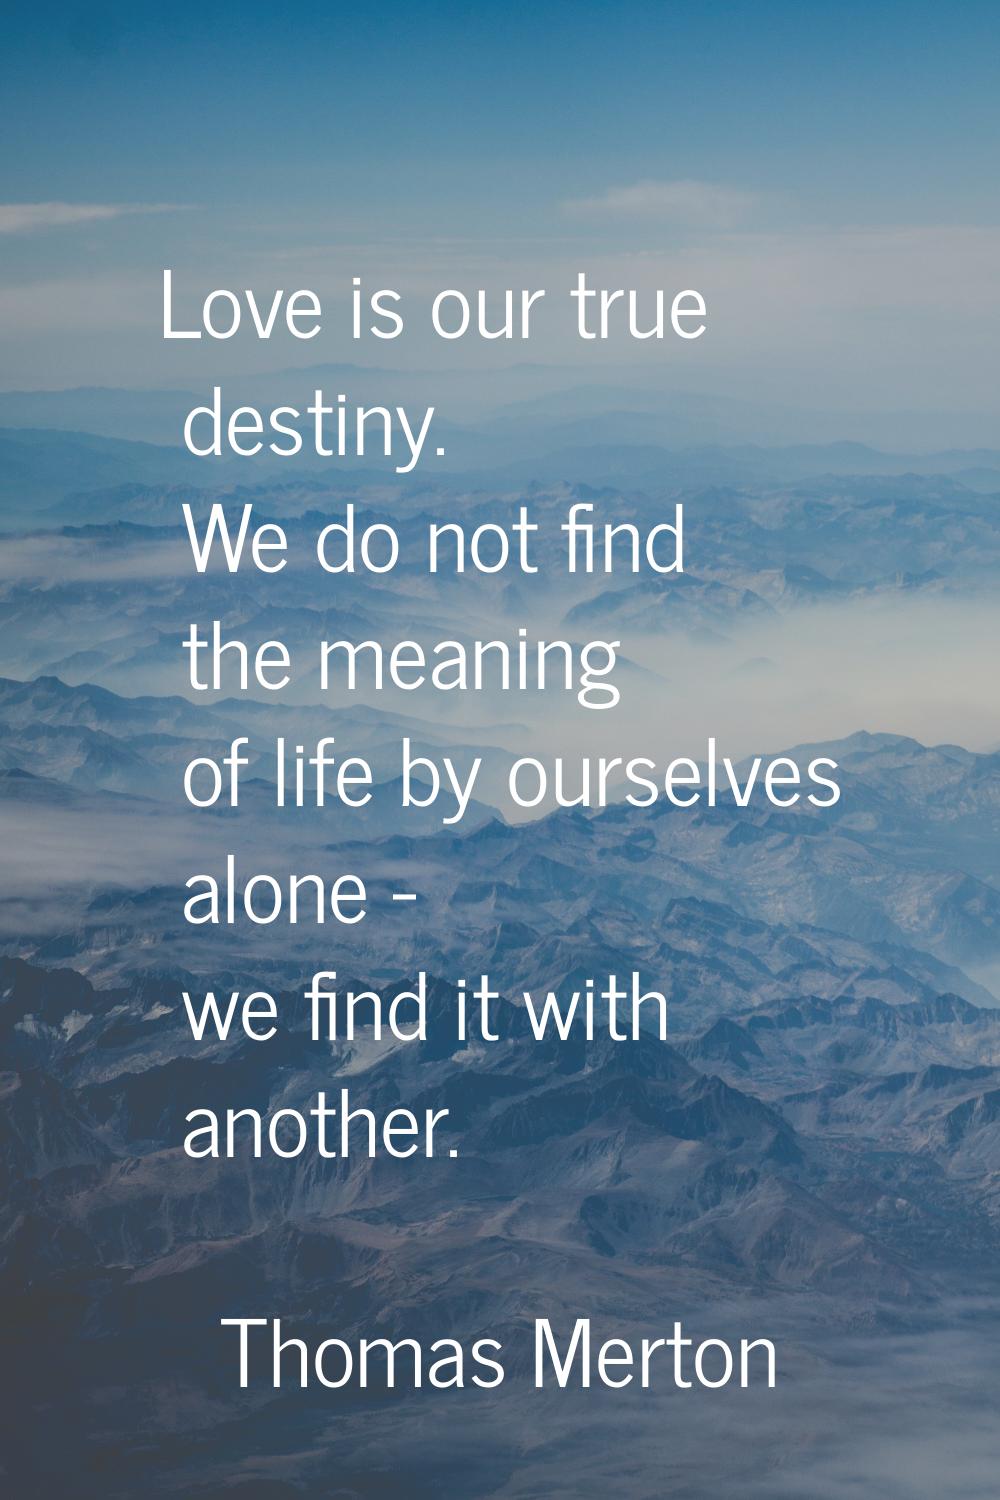 Love is our true destiny. We do not find the meaning of life by ourselves alone - we find it with a